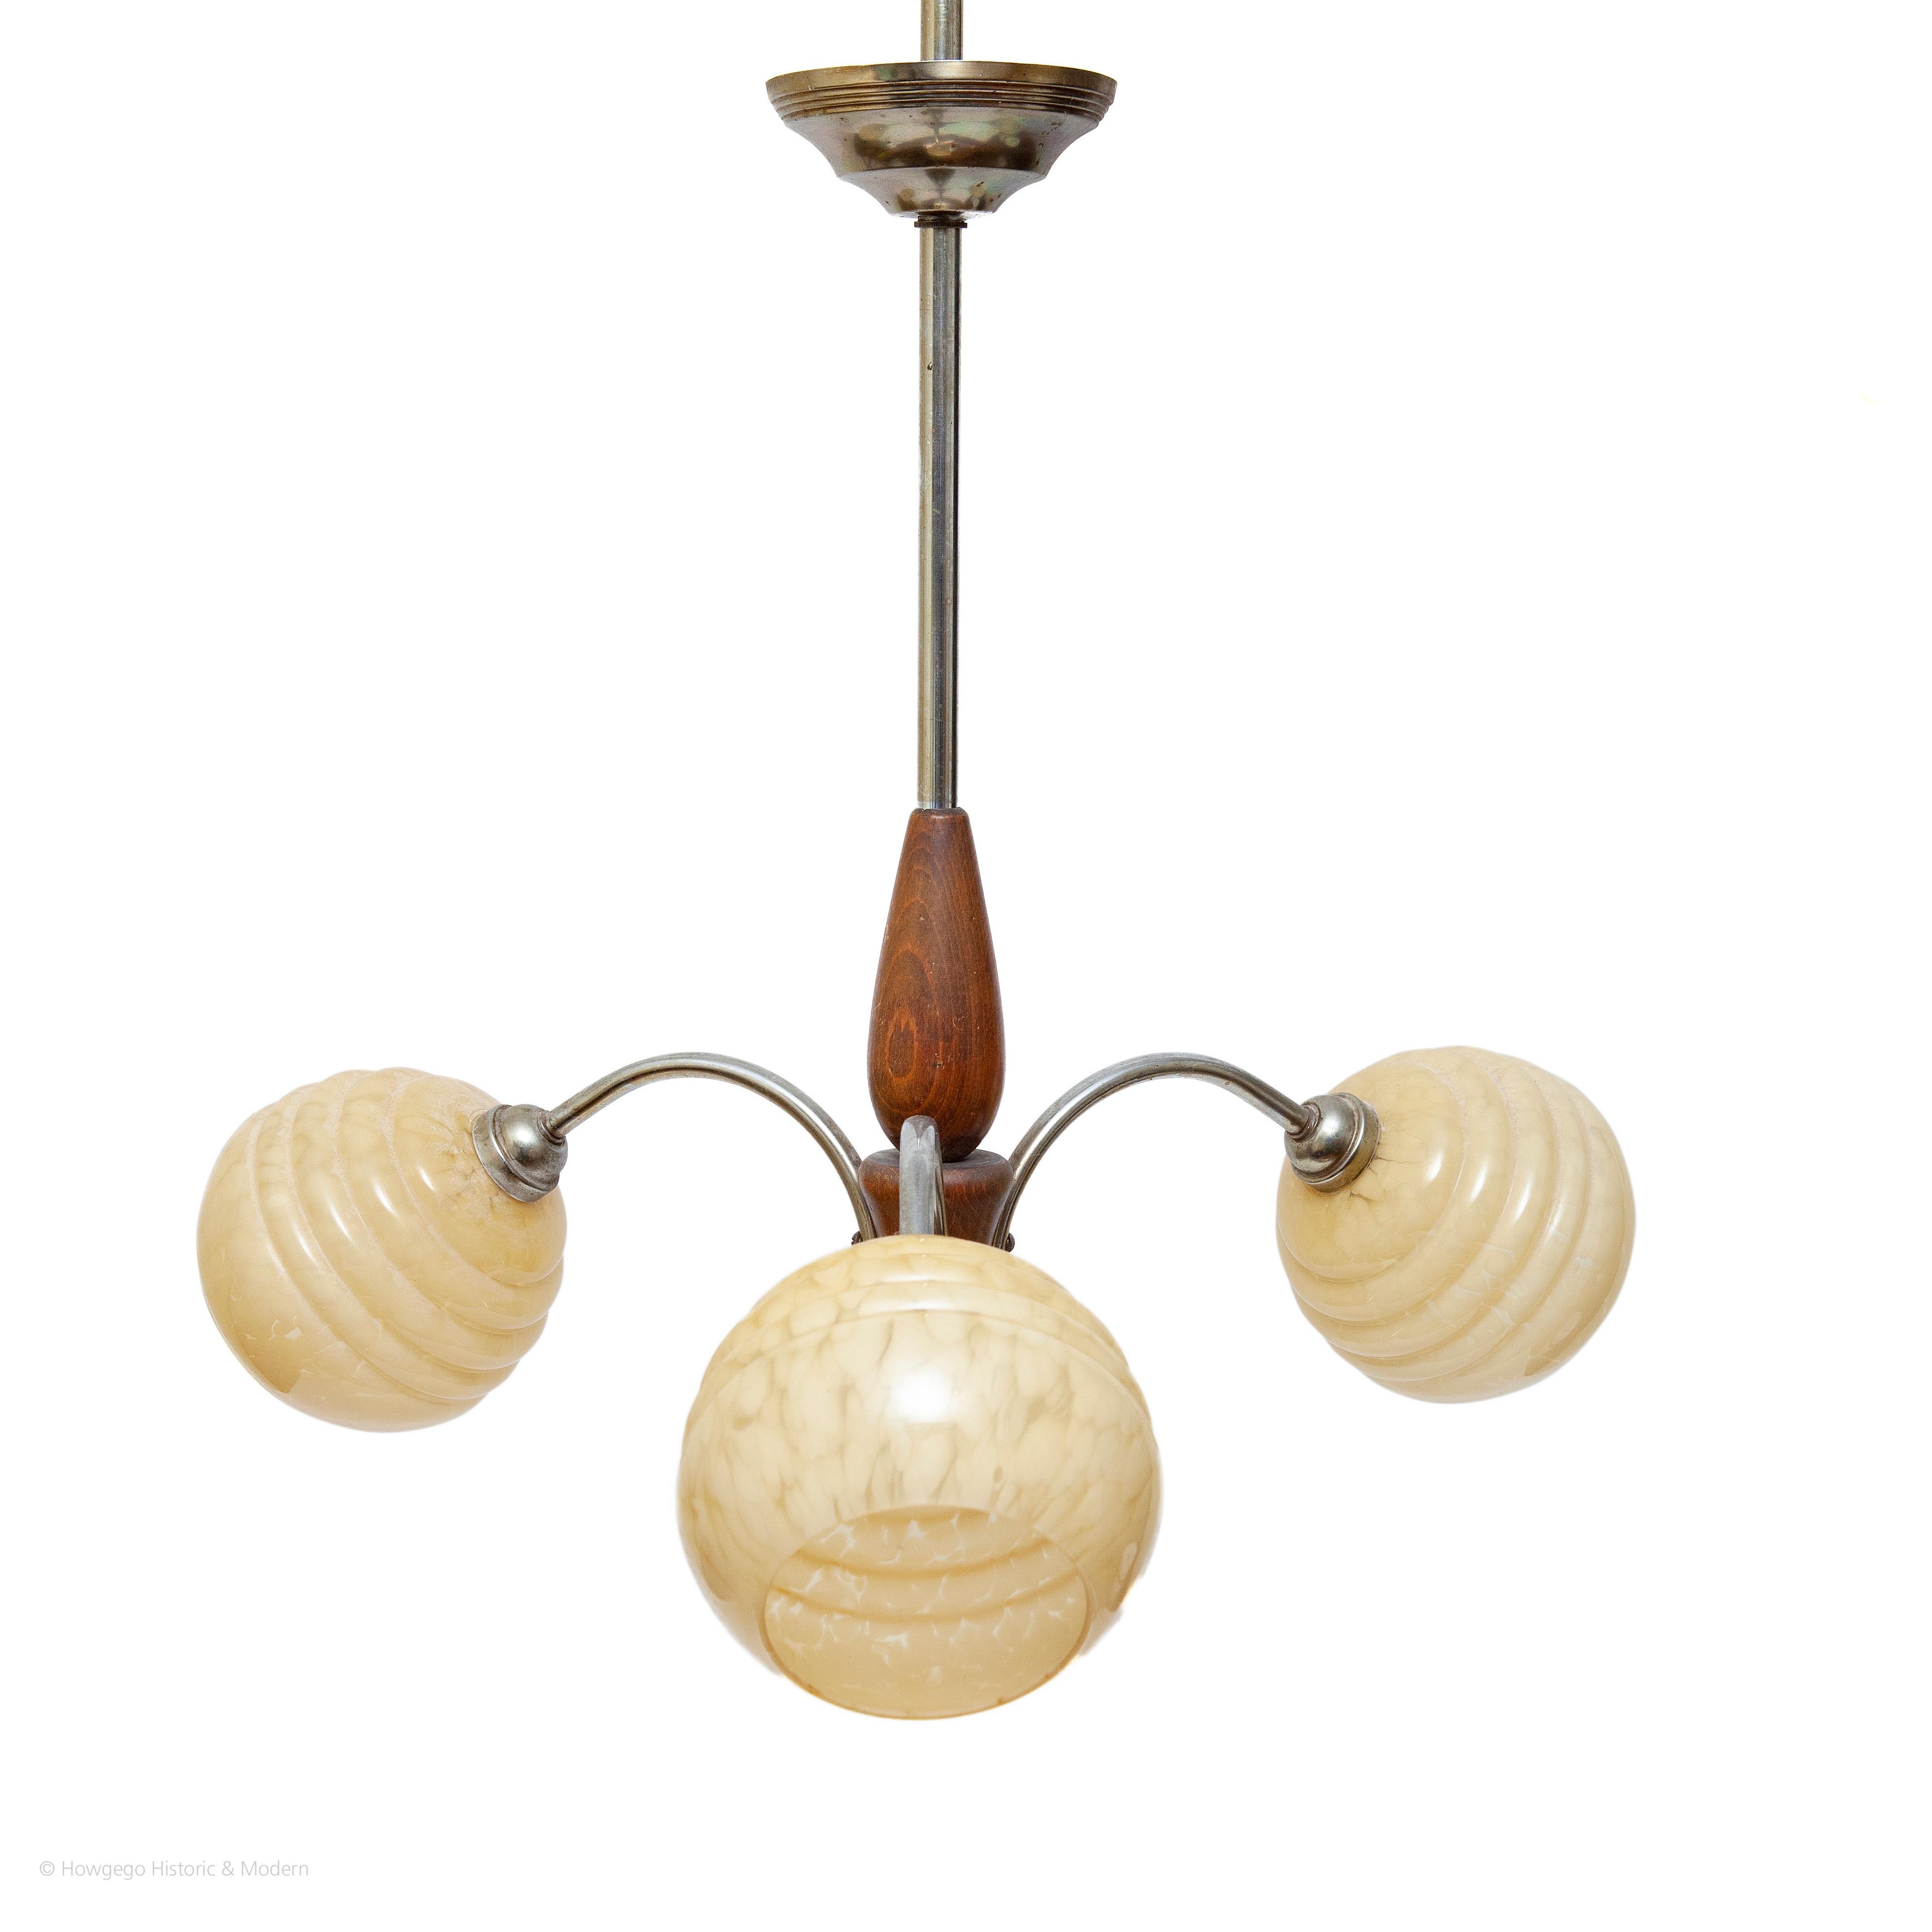 ART DECO, CHROME, TEAK AND GLASS PENDANT LIGHT WITH THREE ARMS/BRANCHES – 63.50cm., 25” high

Elegant, classic Art Deco form injecting the luxurious modernity of this period into the interior
The chrome, teak and glass create a balance of different